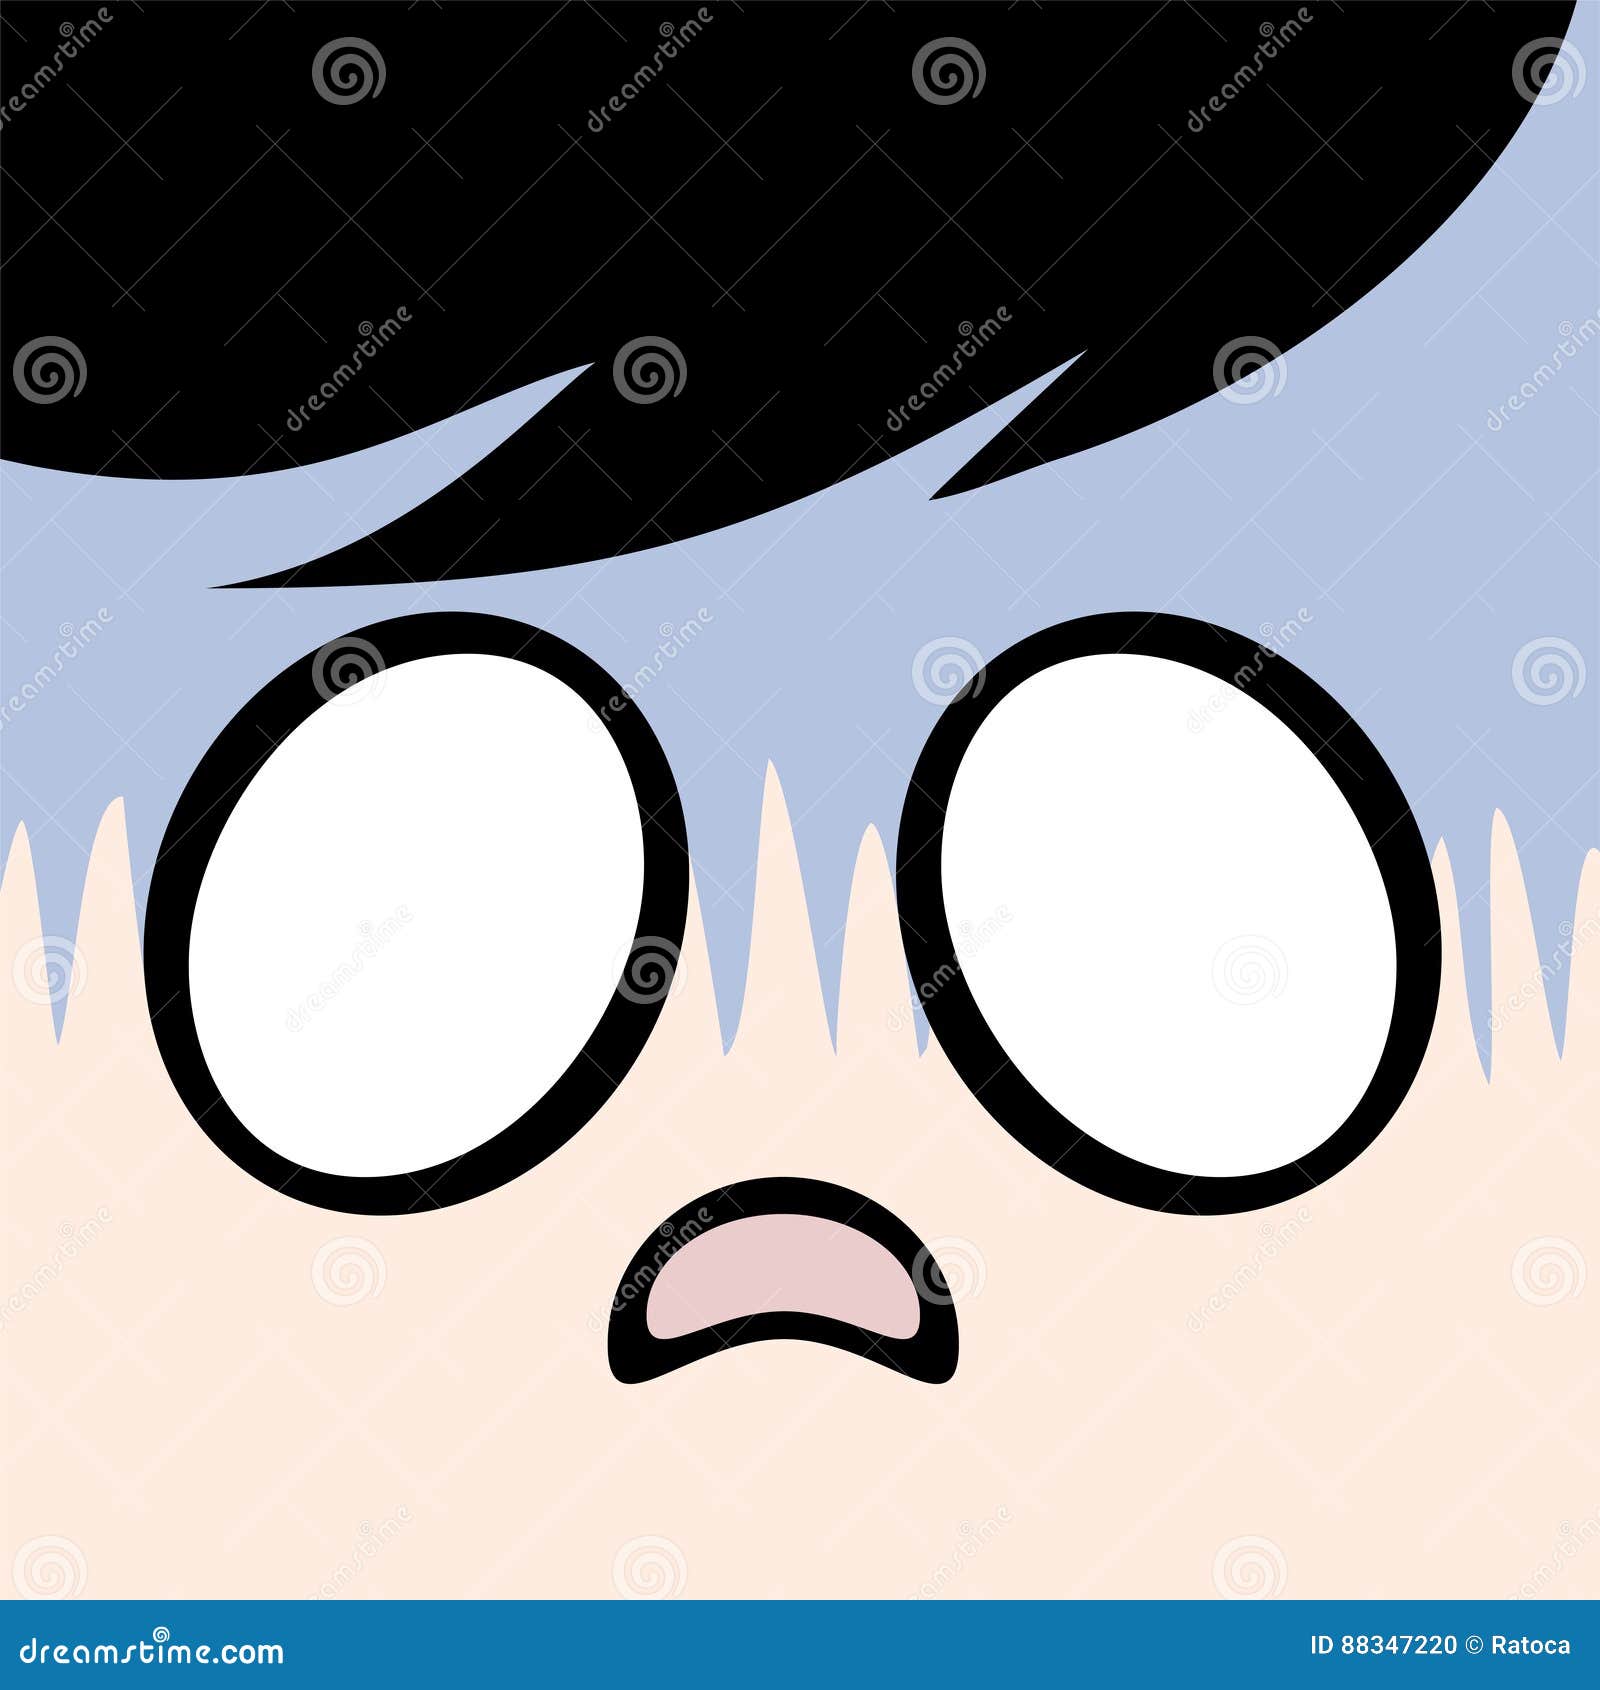 Scared face stock vector. Illustration of draw, fear - 88347220